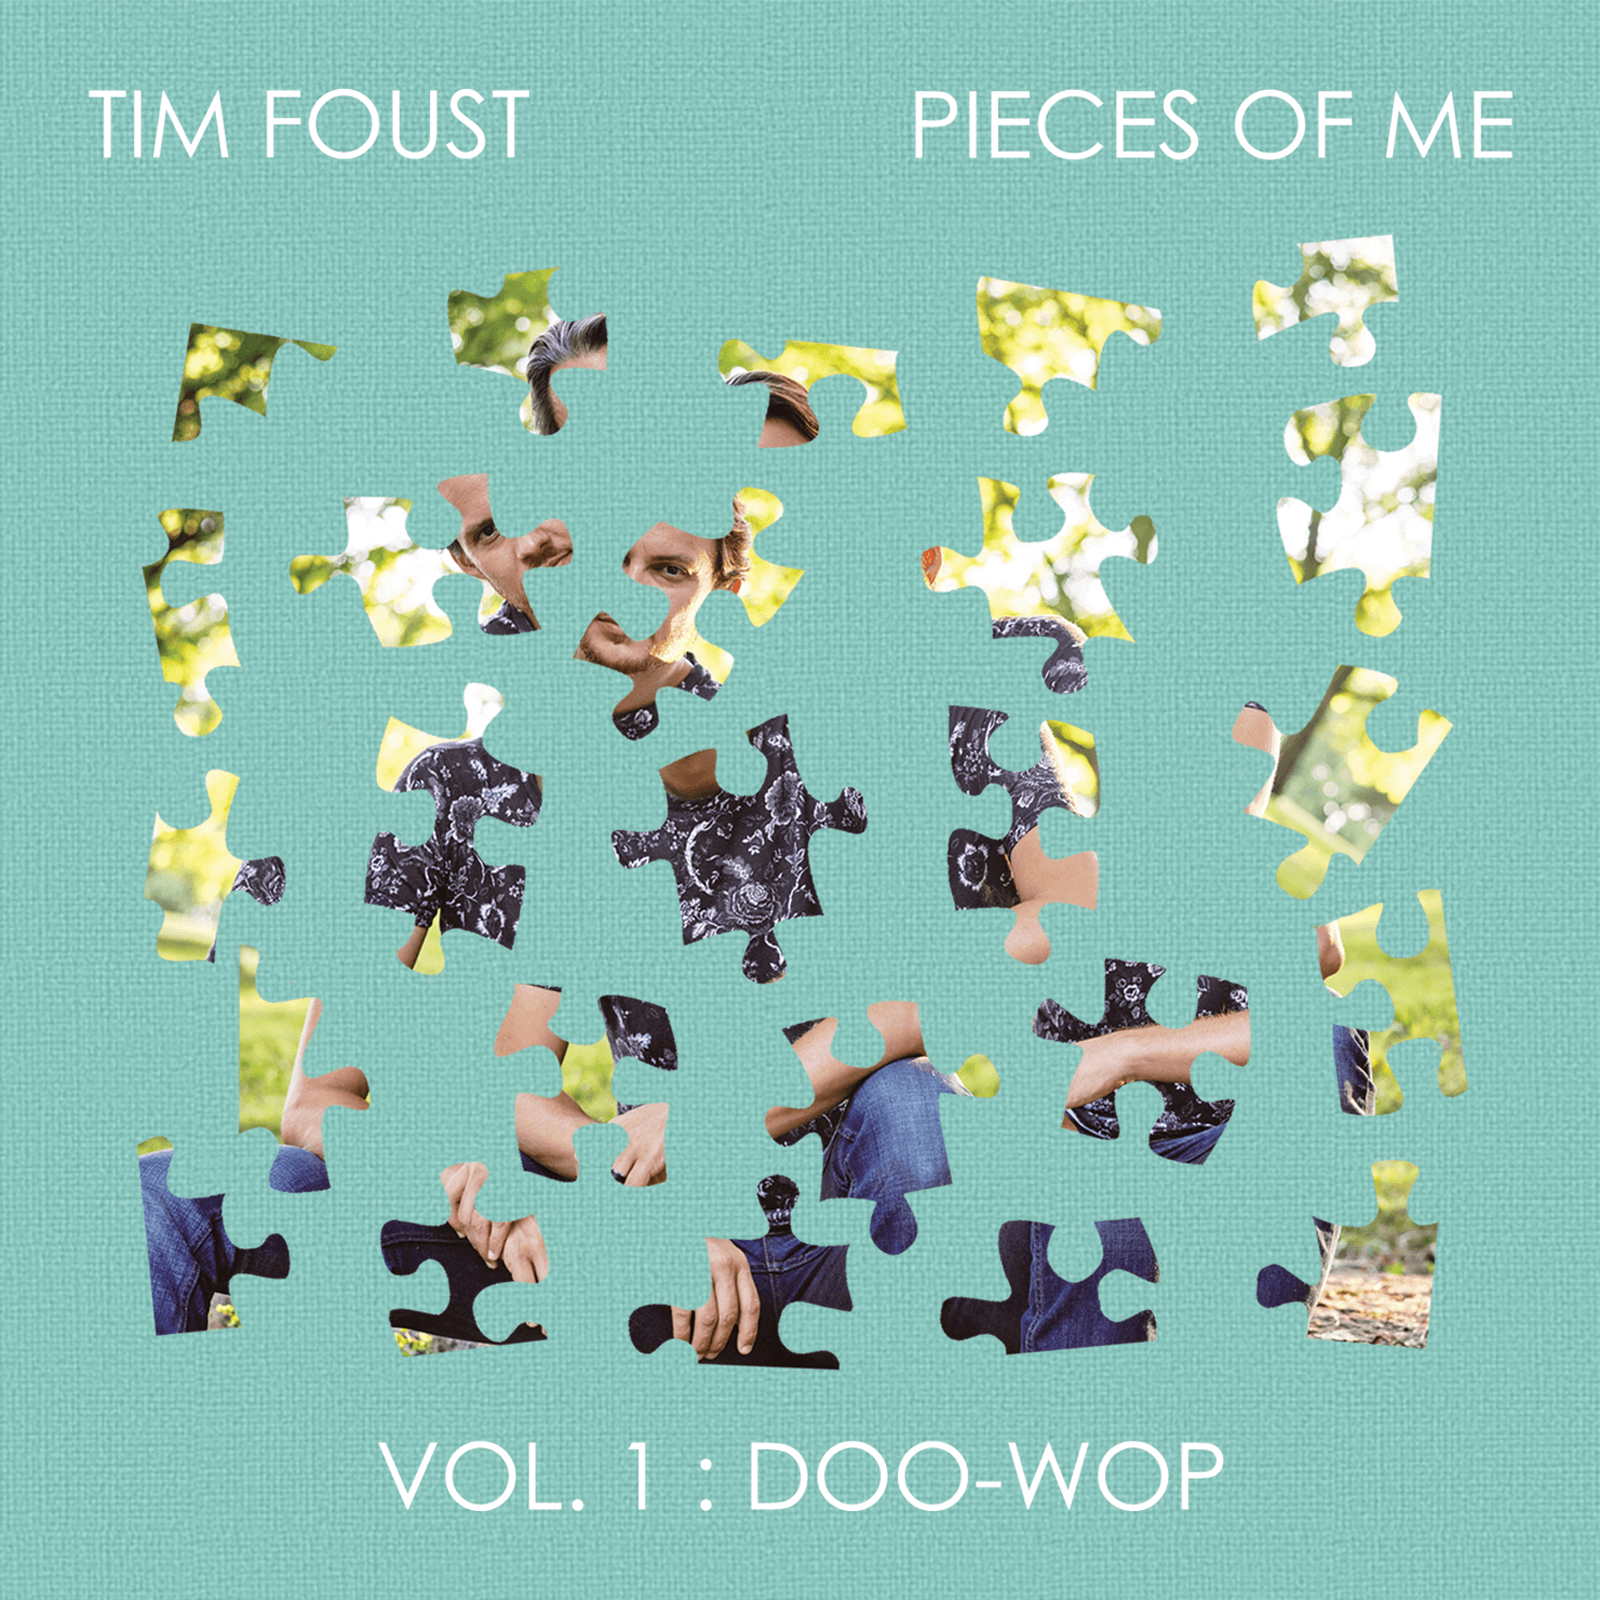 Pieces Of Me Vol. 1: DOO-WOP by Tim Foust - Legendary Vocals by Peter  Hollens